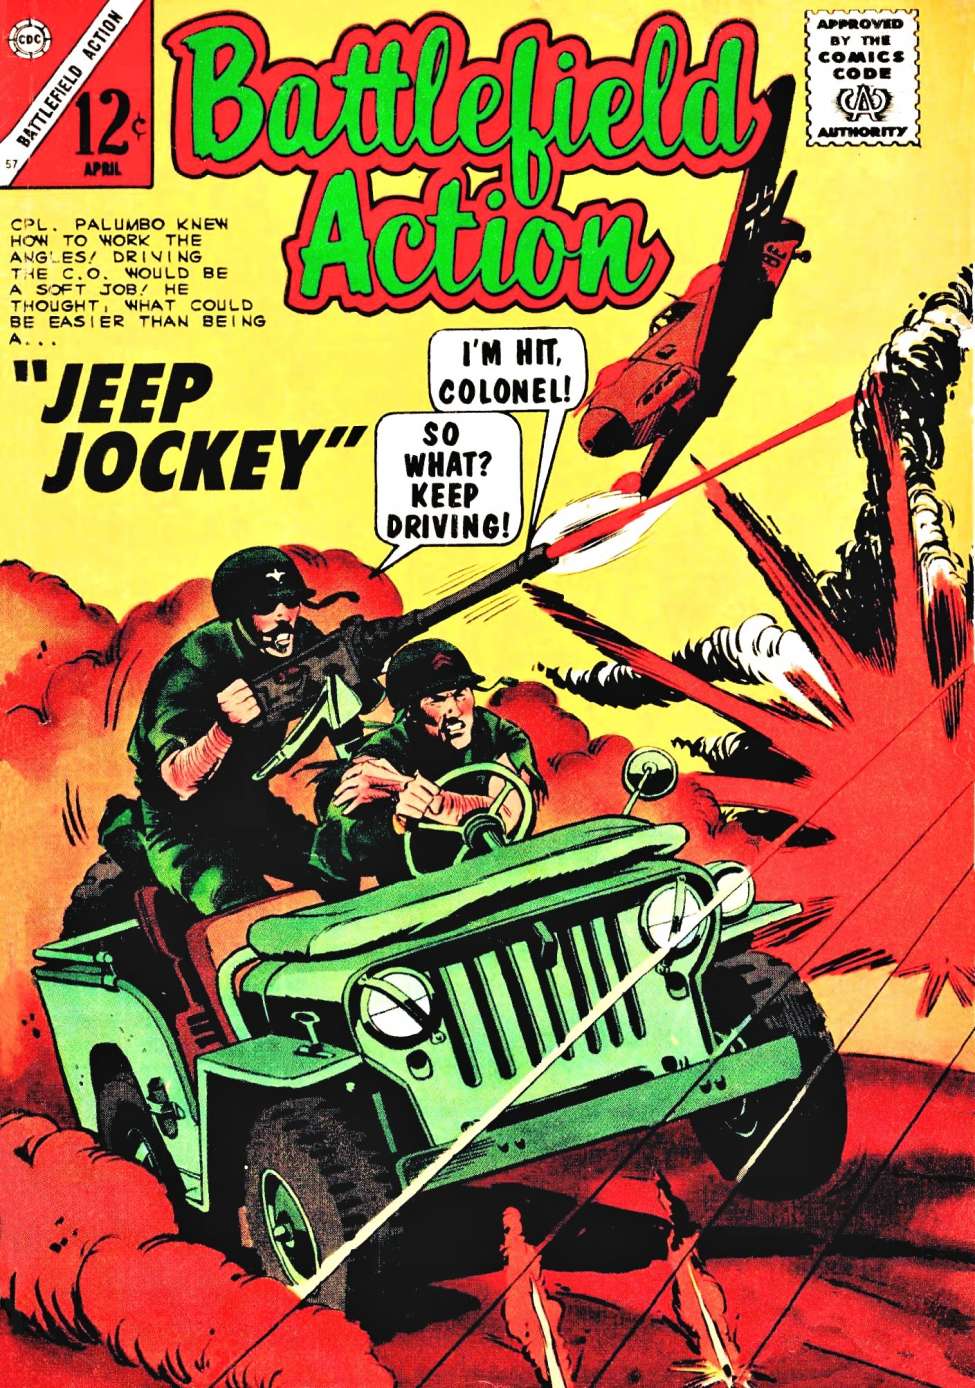 Book Cover For Battlefield Action 57